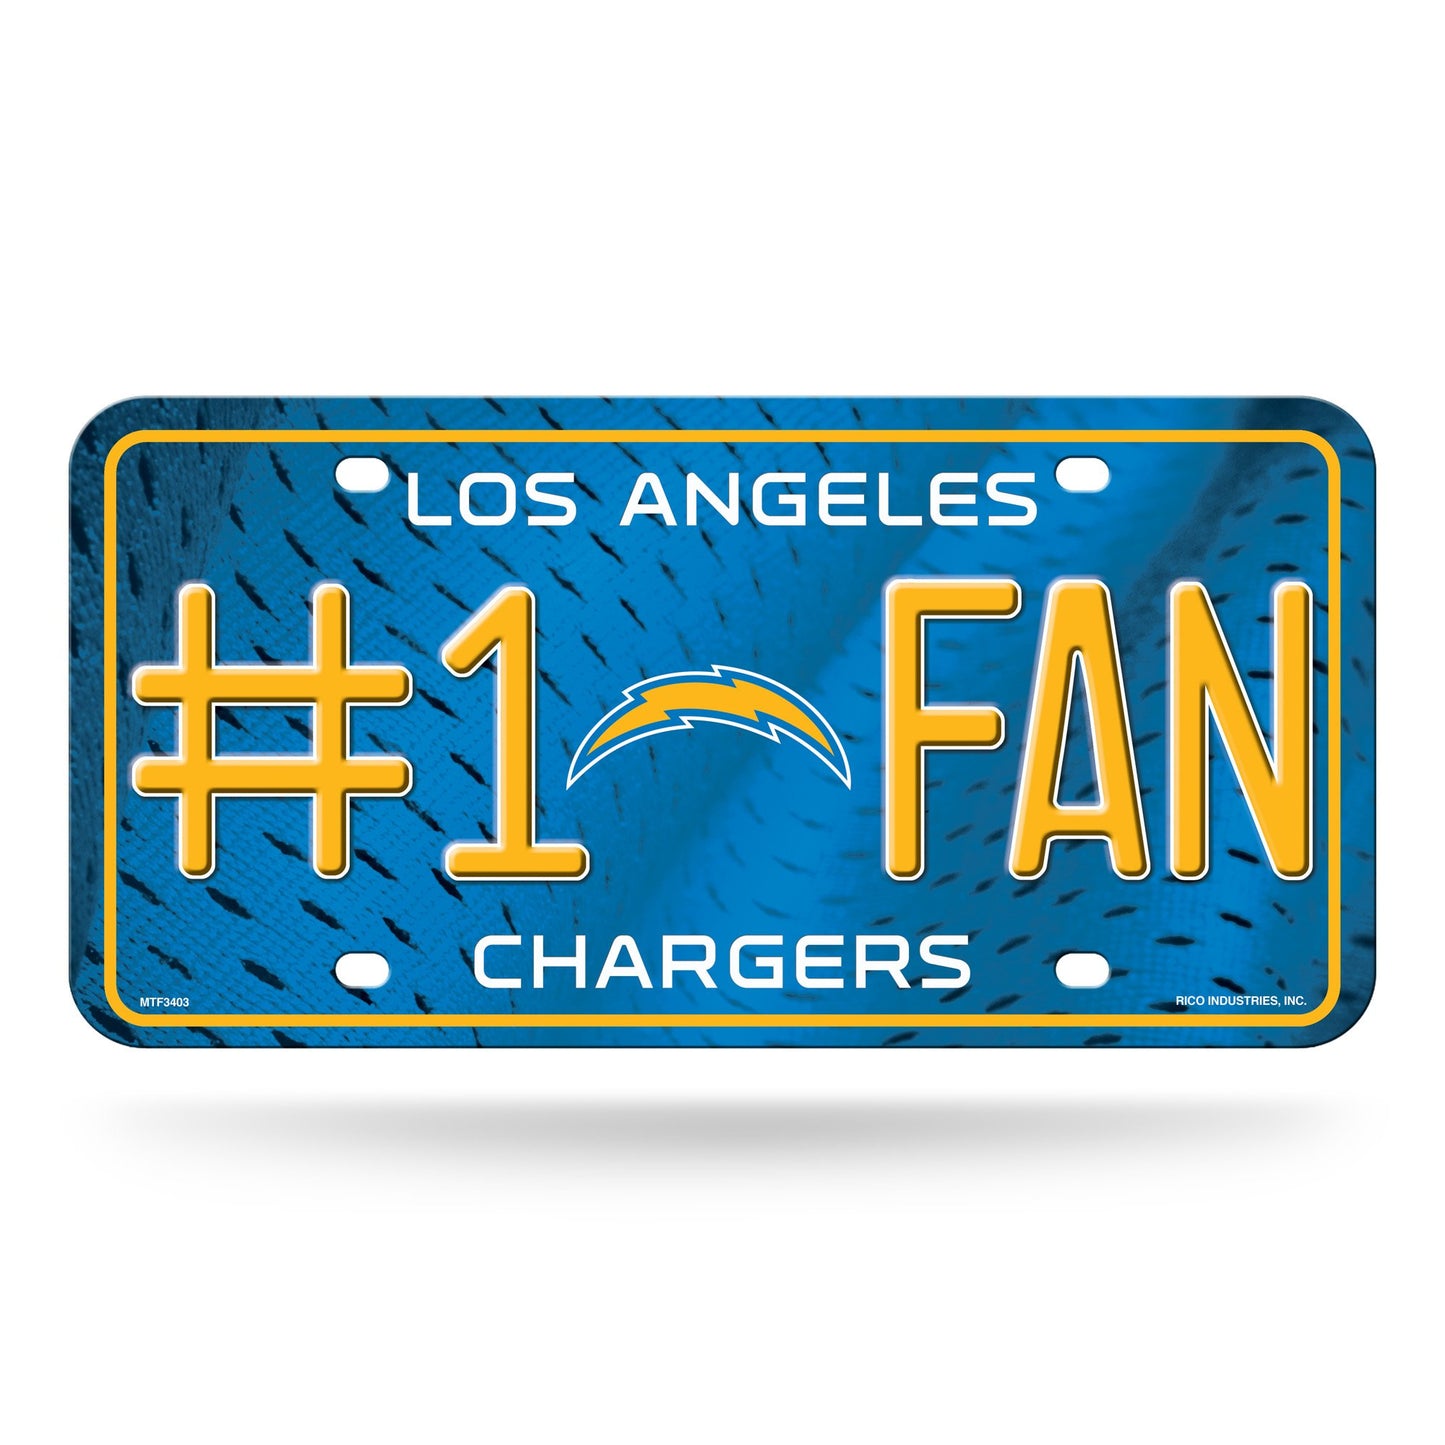 Los Angeles Chargers #1 Fan Metal License Plate by Rico